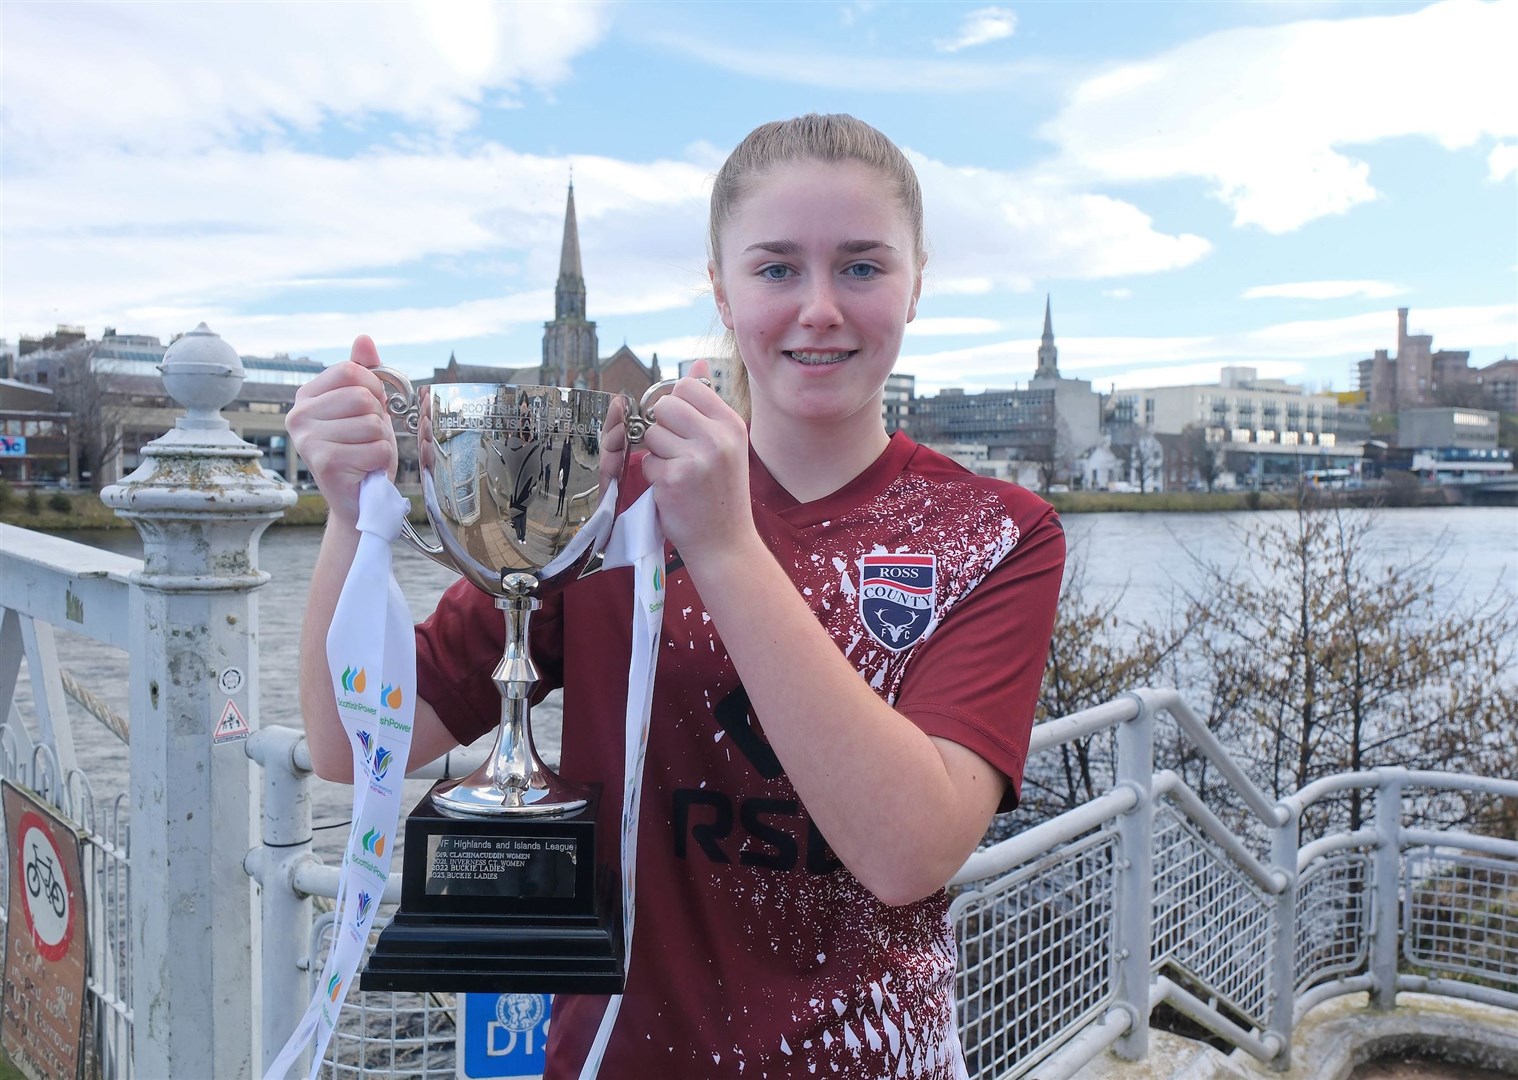 Emma Scobbie and Ross County will be hoping to claim the Highlands and Islands League trophy. Picture: Aimee Todd/Sportpix